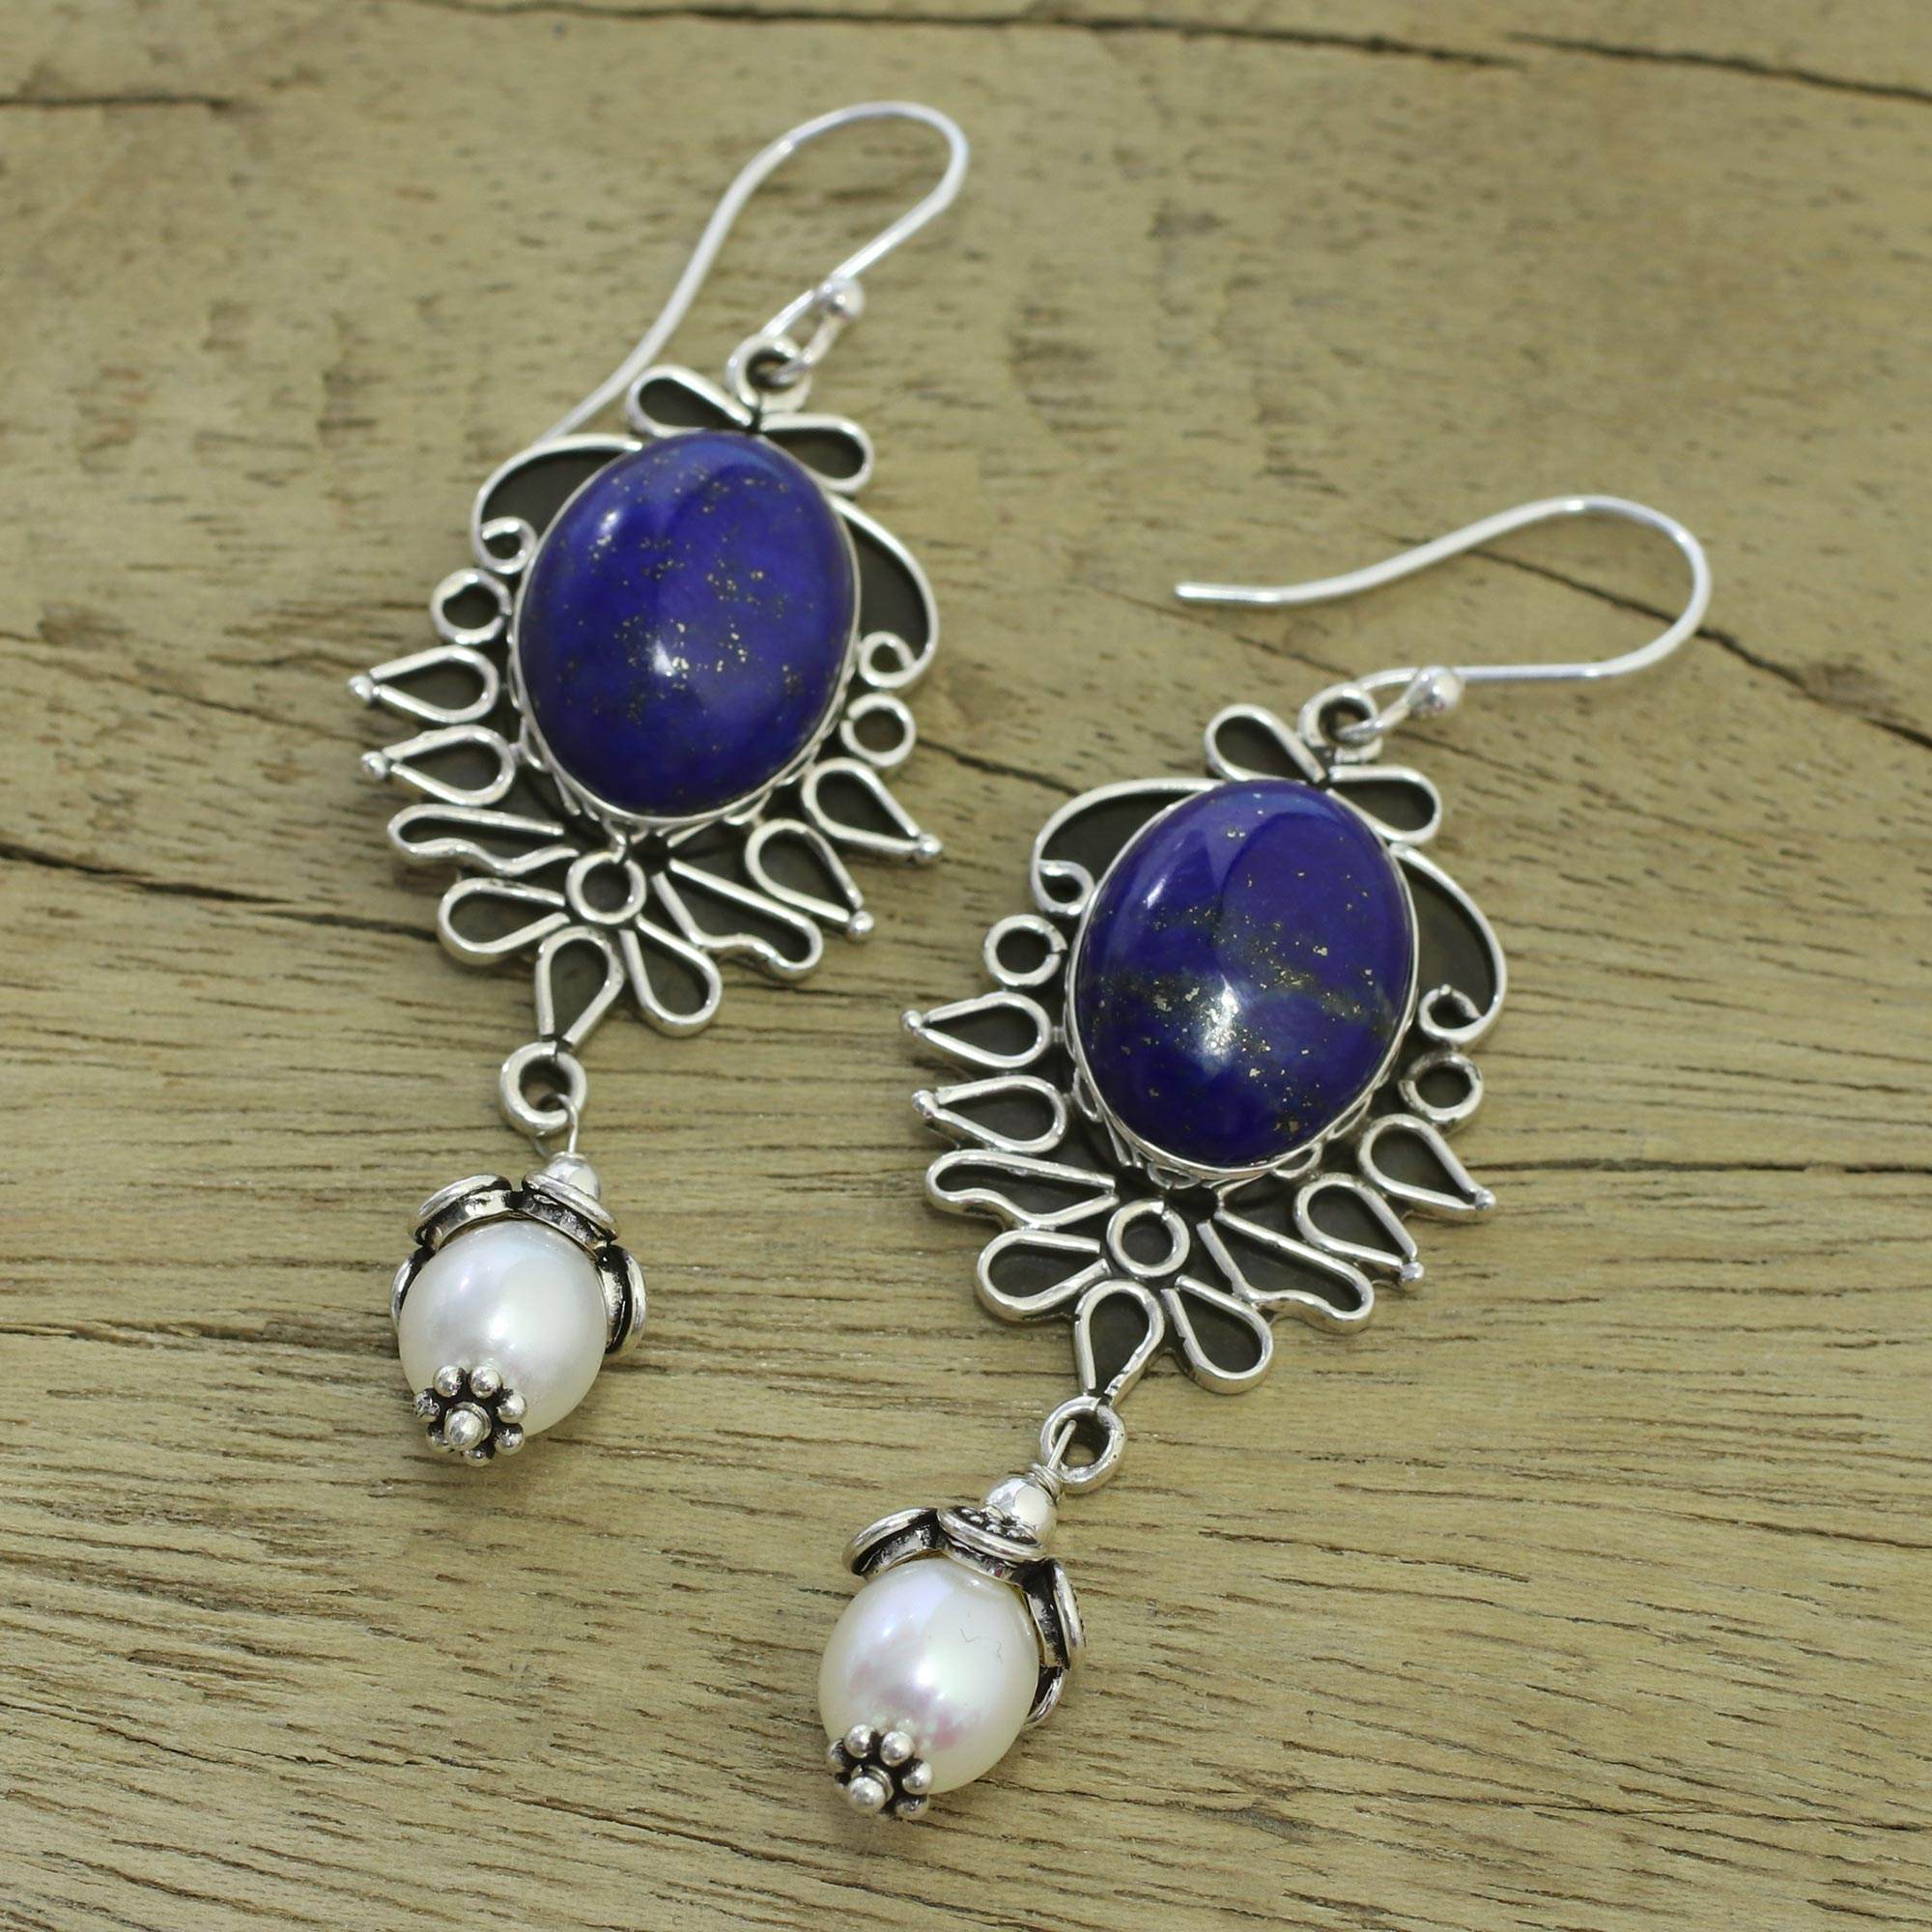 Lapis Lazuli and Pearl Earrings in Sterling Silver - Ethereal | NOVICA